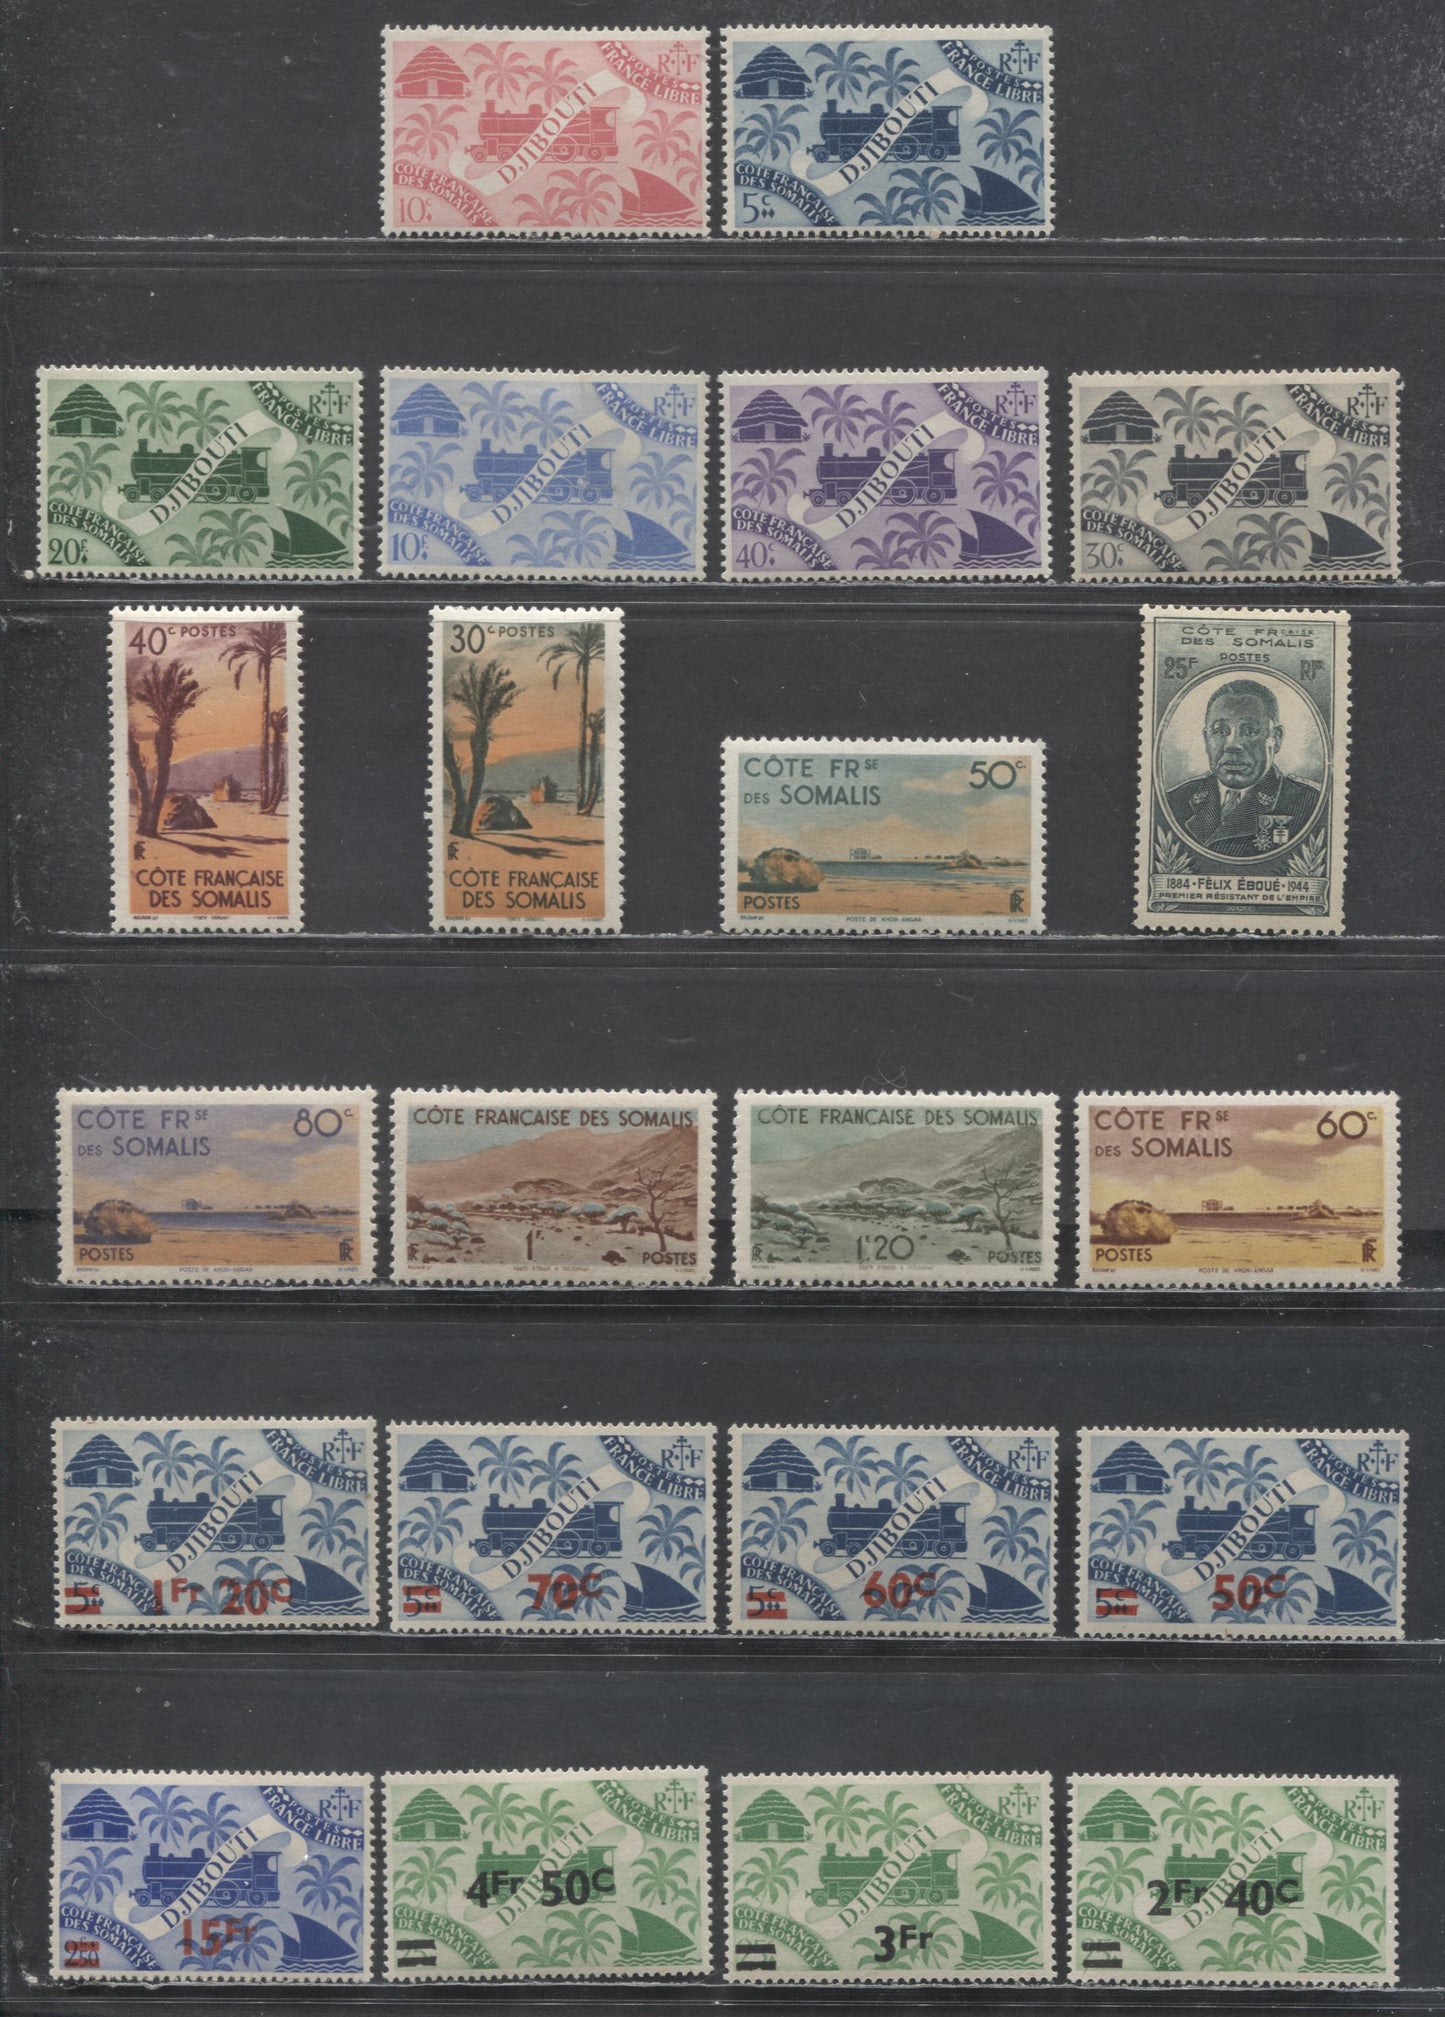 Lot 7 Affars & Issas (Djibouti) SC#224/255 1943-1947 Locomotive, Palms & Pictorial Definitives, 22 VFOG Singles, Click on Listing to See ALL Pictures, 2017 Scott Cat. $21.85